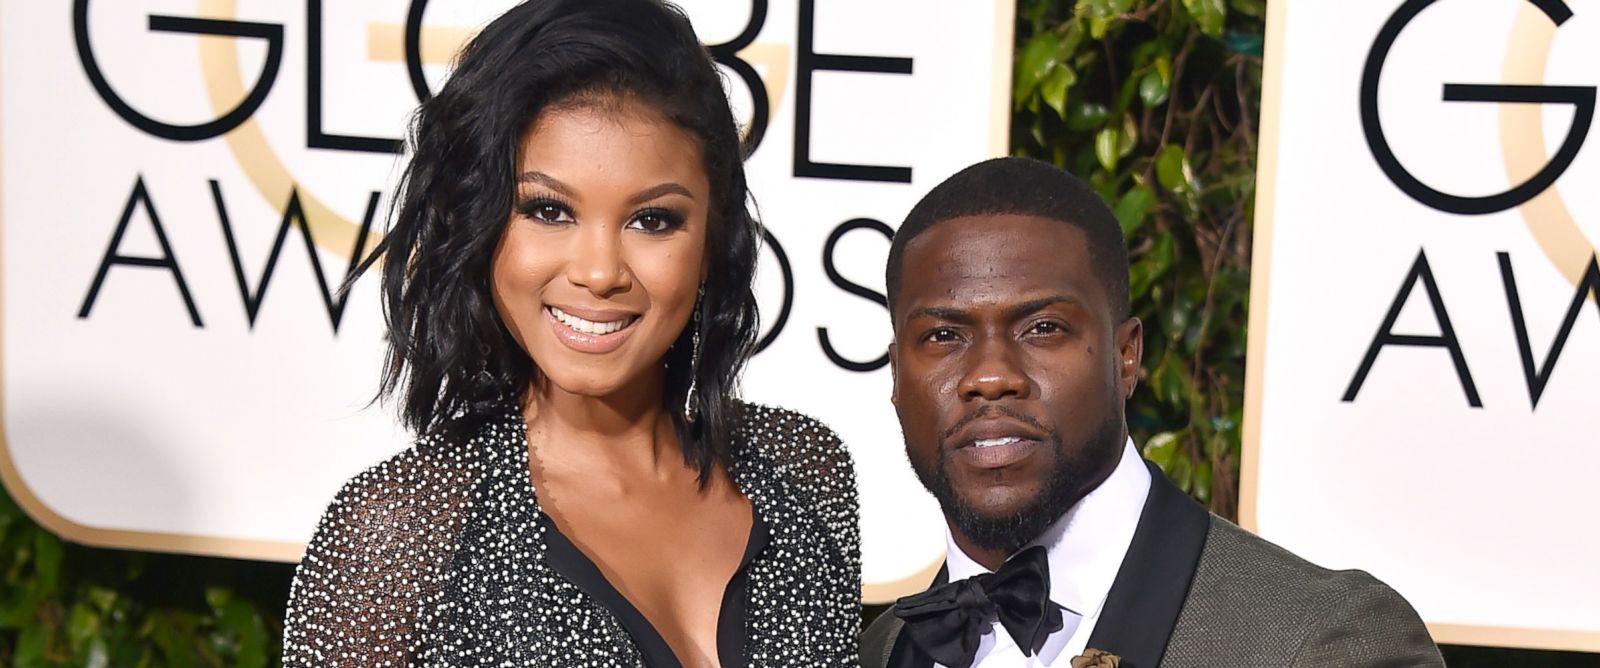 The elegant model Eniko Parrish with her husband Kevin Hart the highest paid comedian in the world 